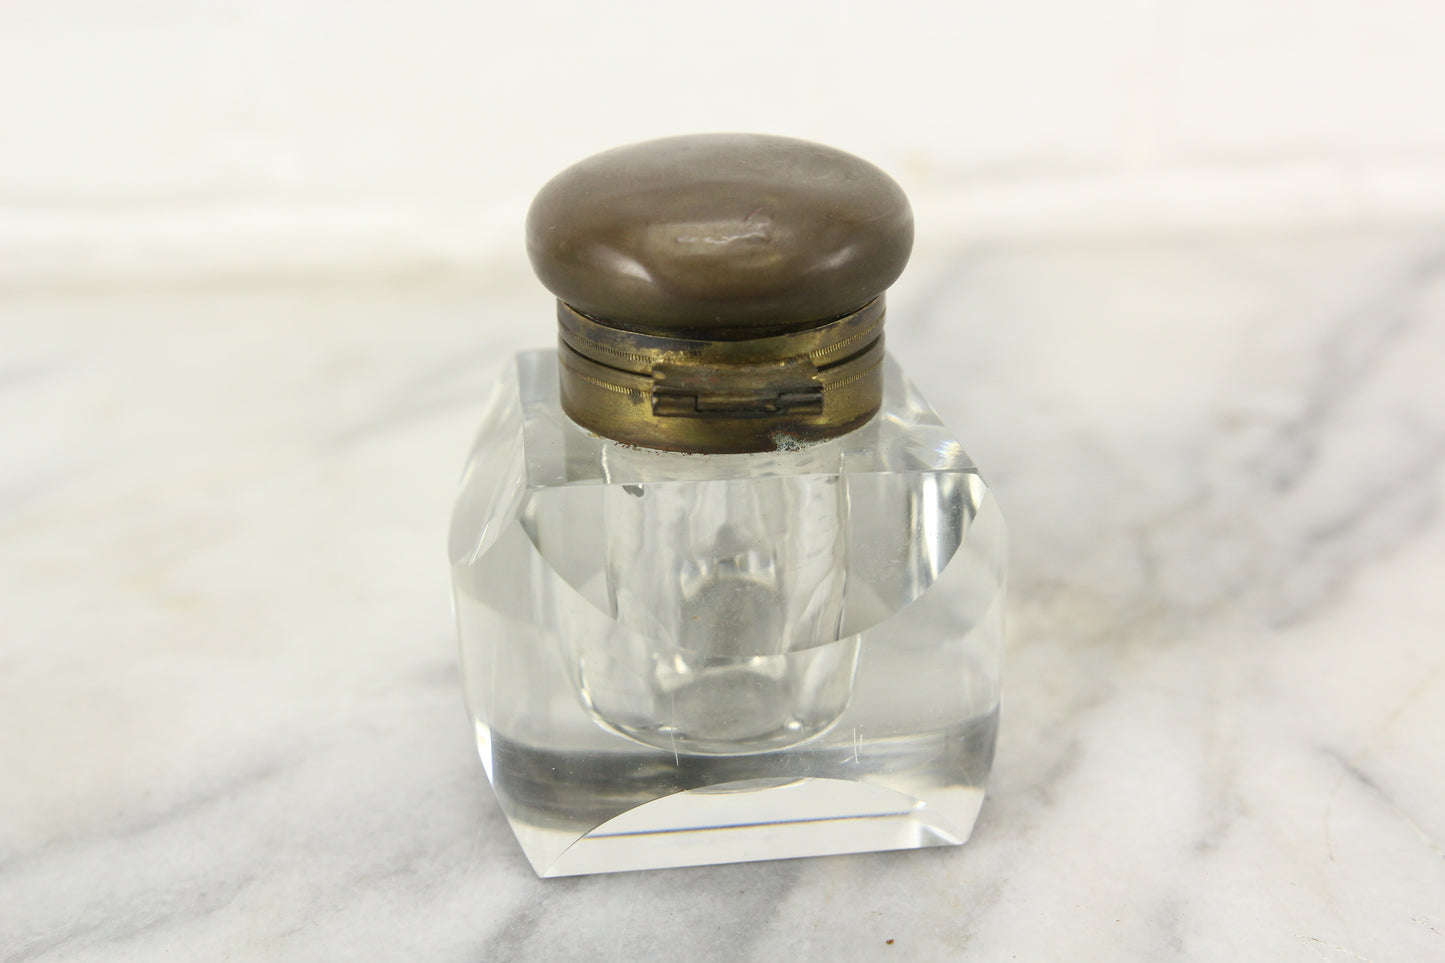 Antique Glass Rotund Inkwell with Beveled Edges and Brass Top Lid